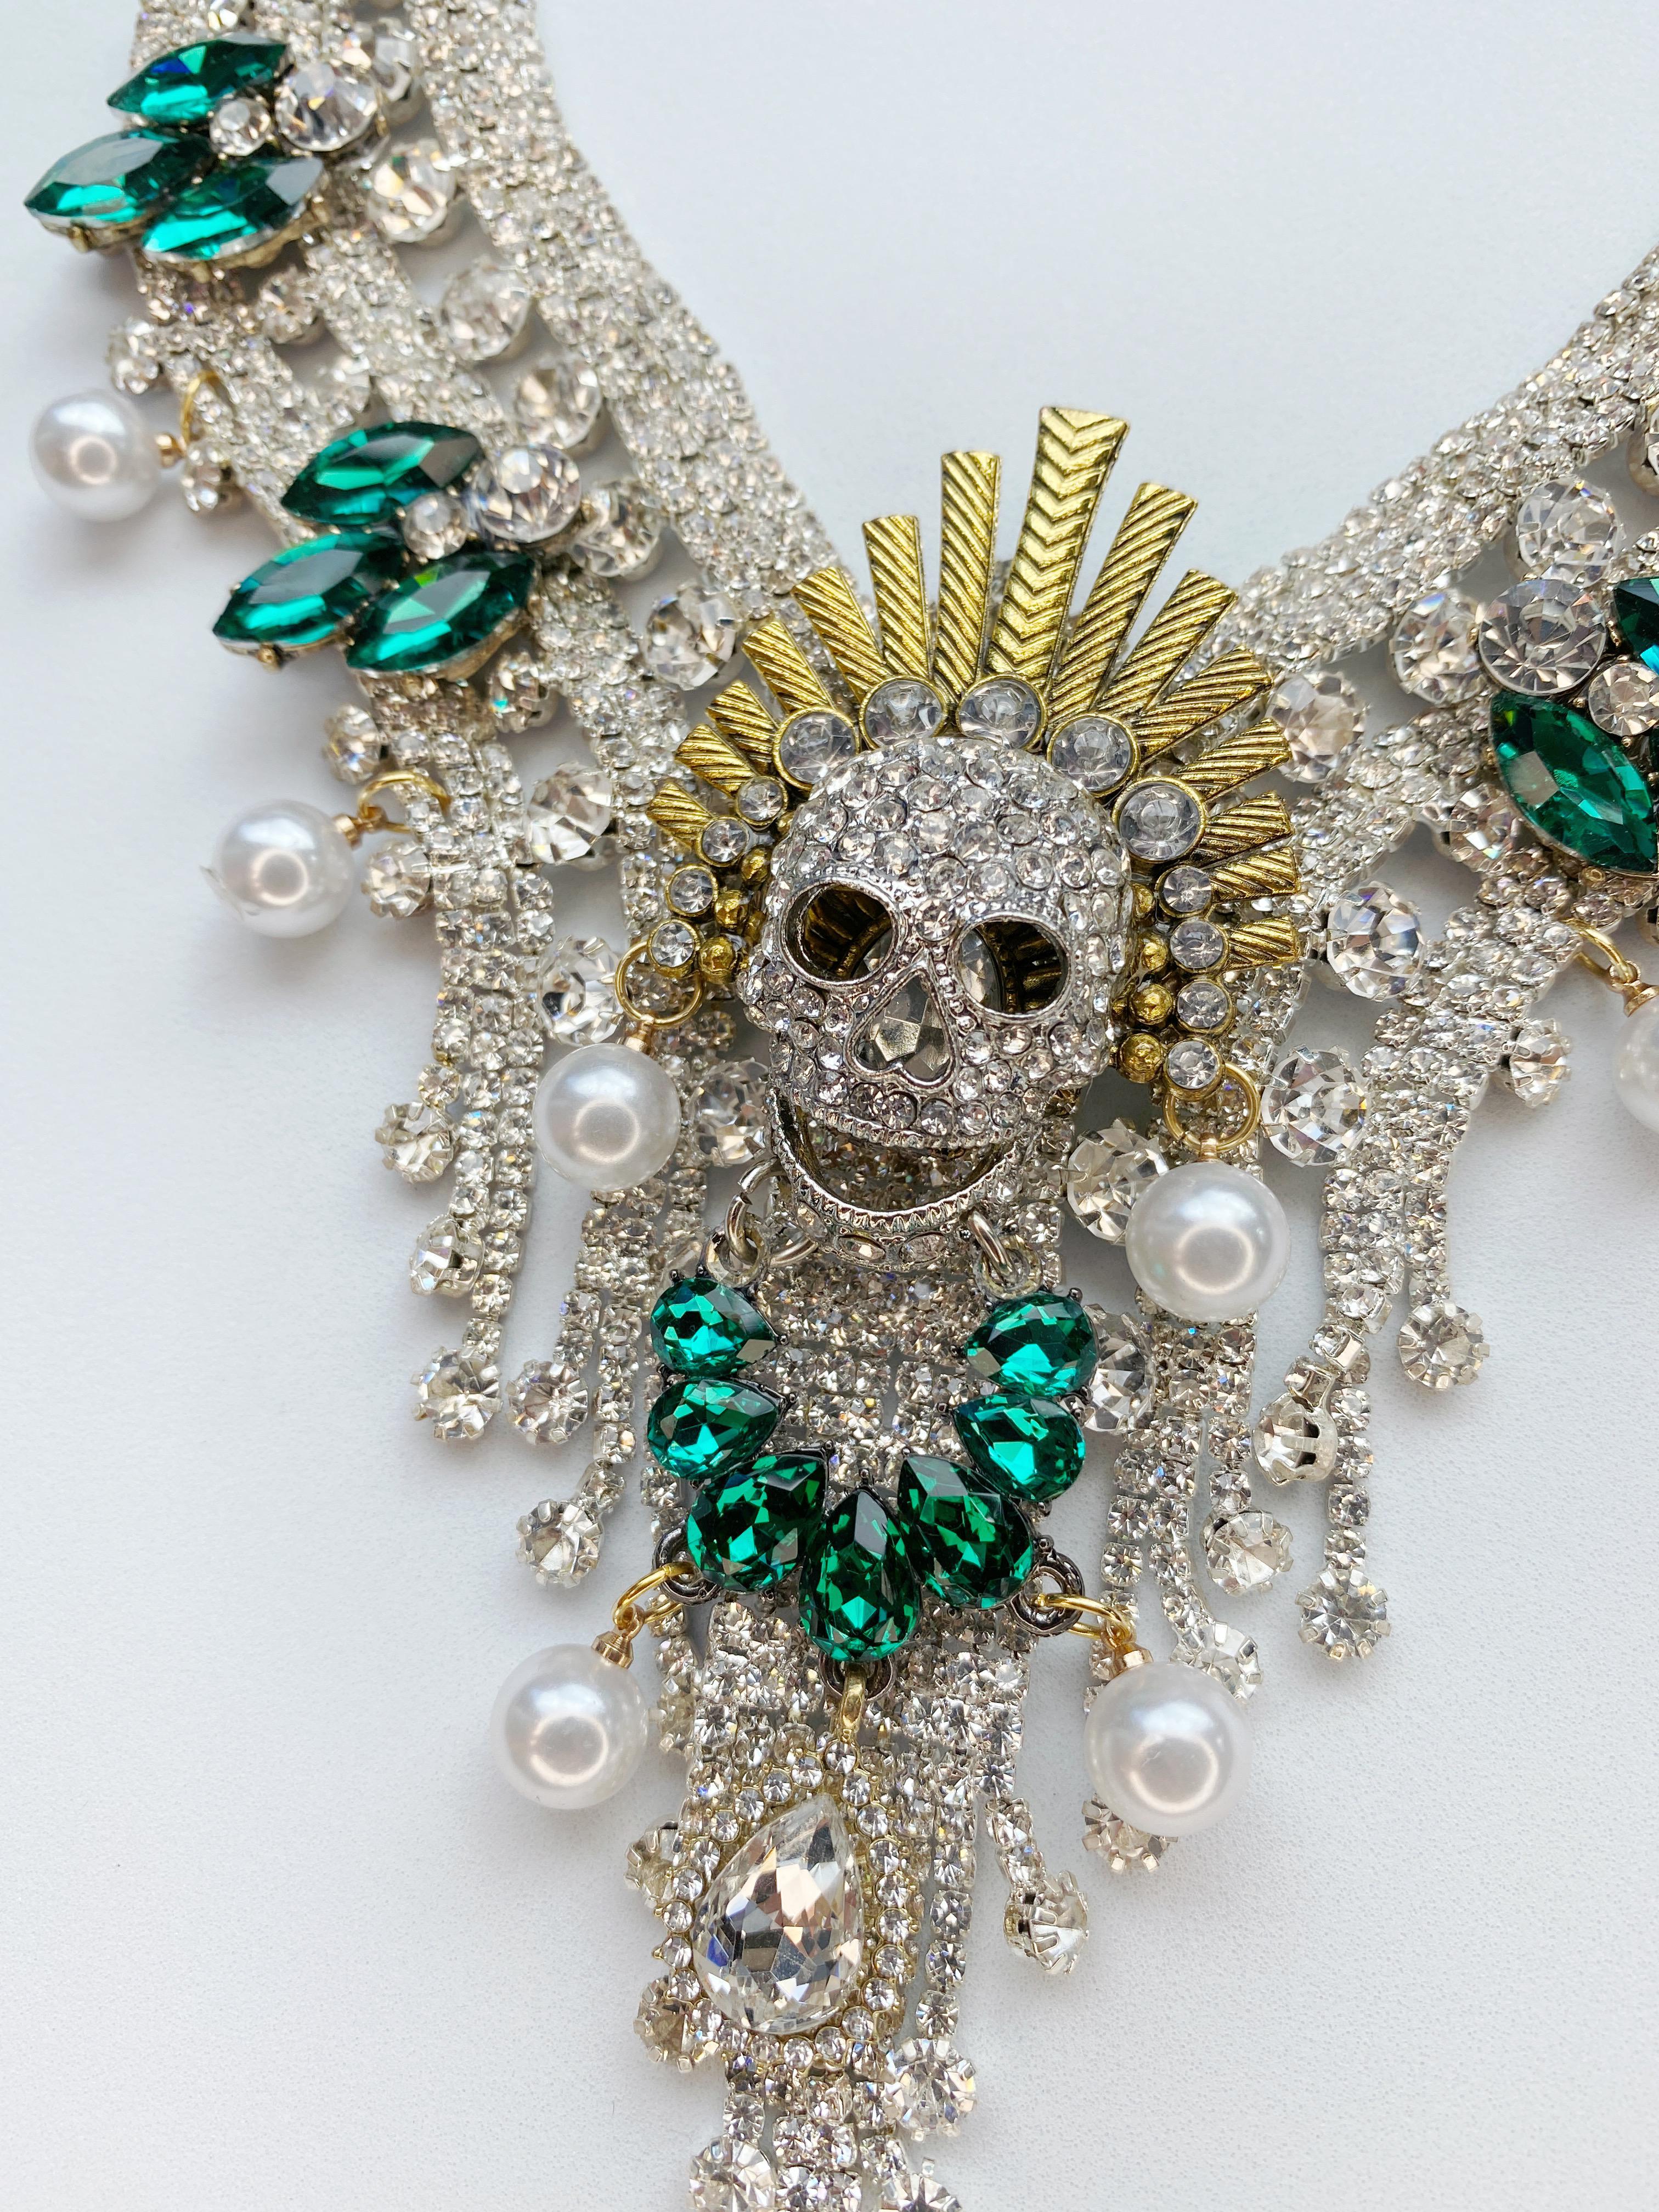 One-of-a-kind Necklace By Sebastian Jaramillo.  This stunning necklace features emerald green and clear crystals with Faux pearls and a center skull. Ajustable length. 